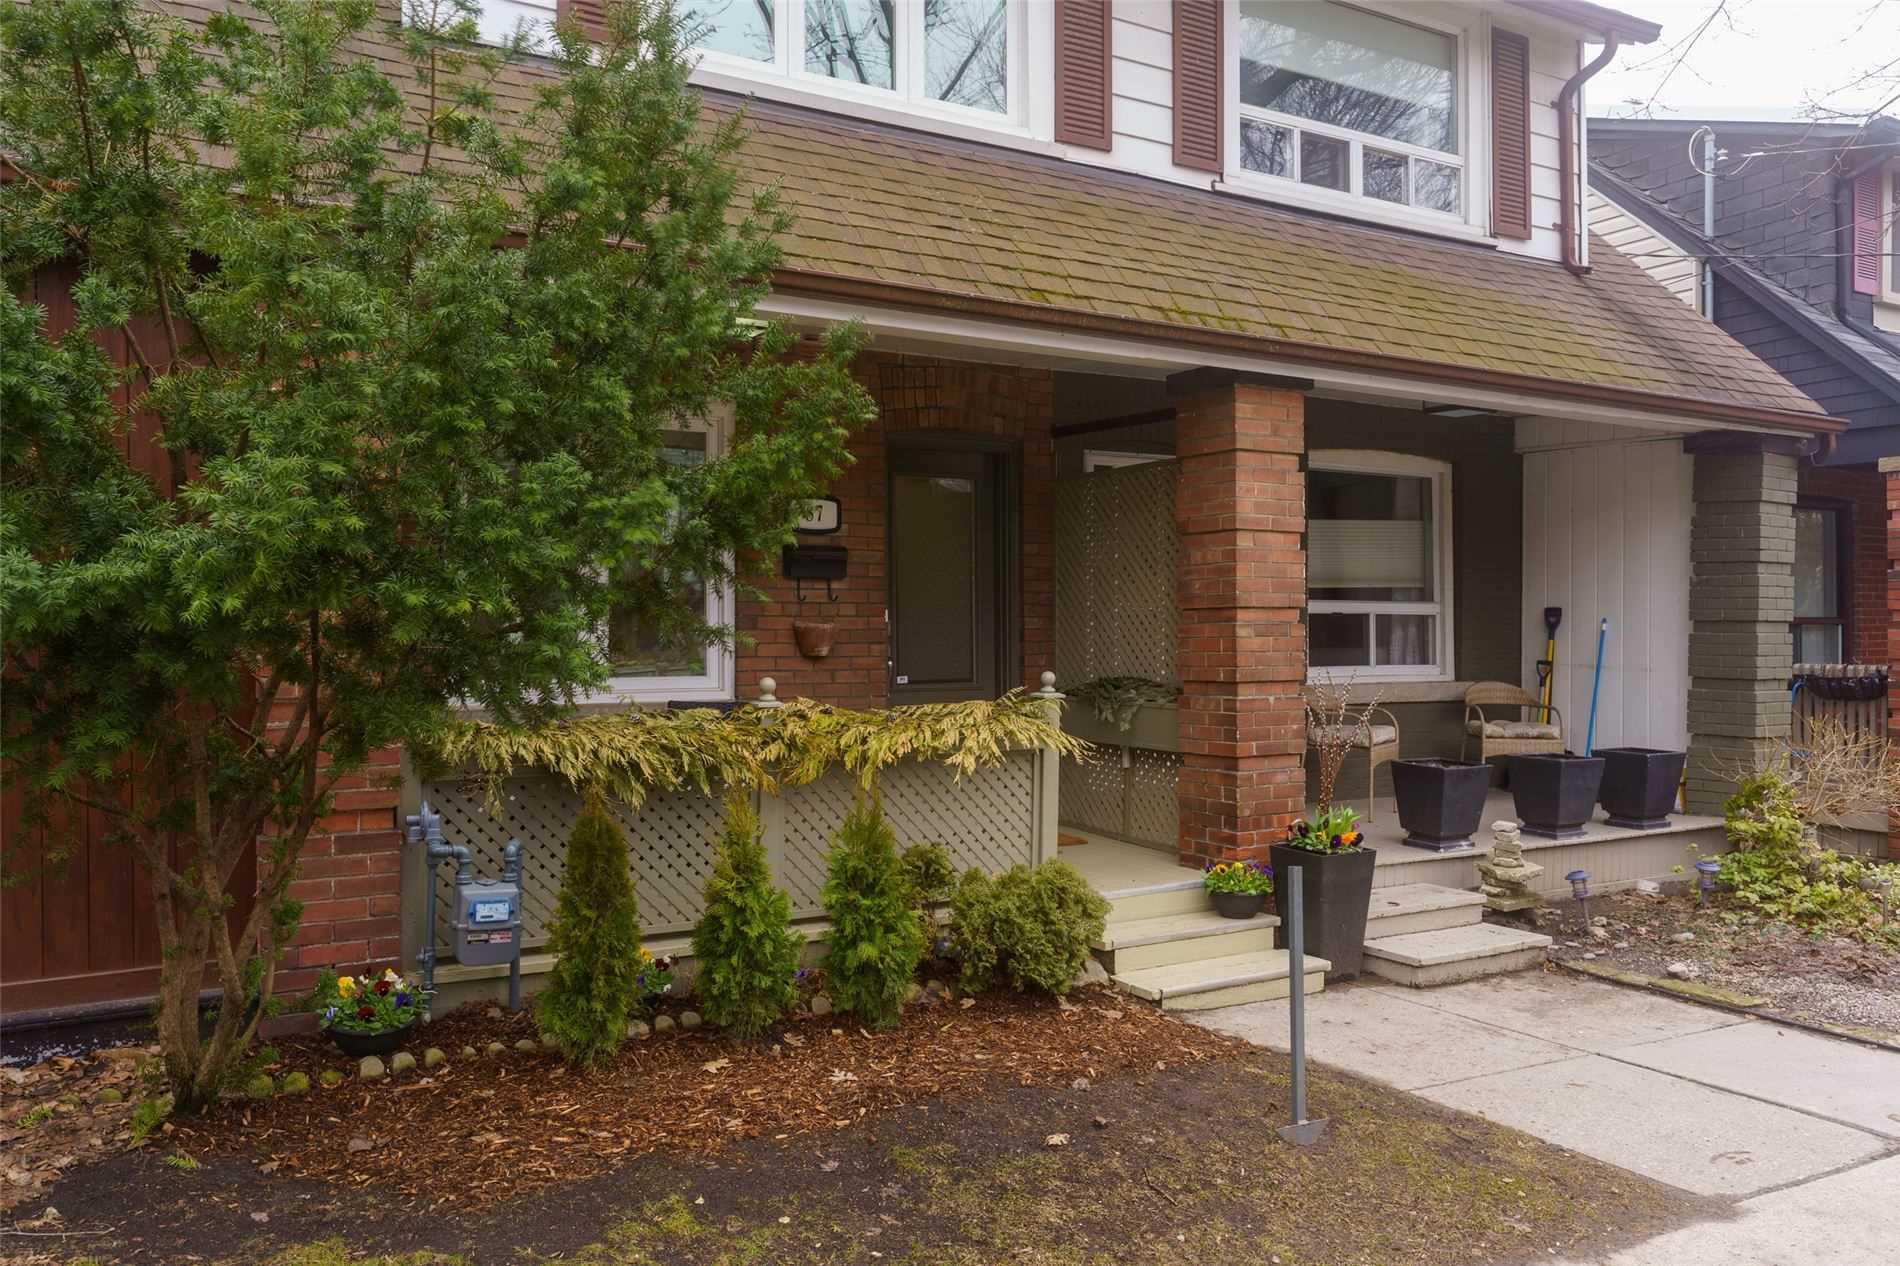 Sold: 2-Bedroom Townhome in East York (87 Merrill Ave E)